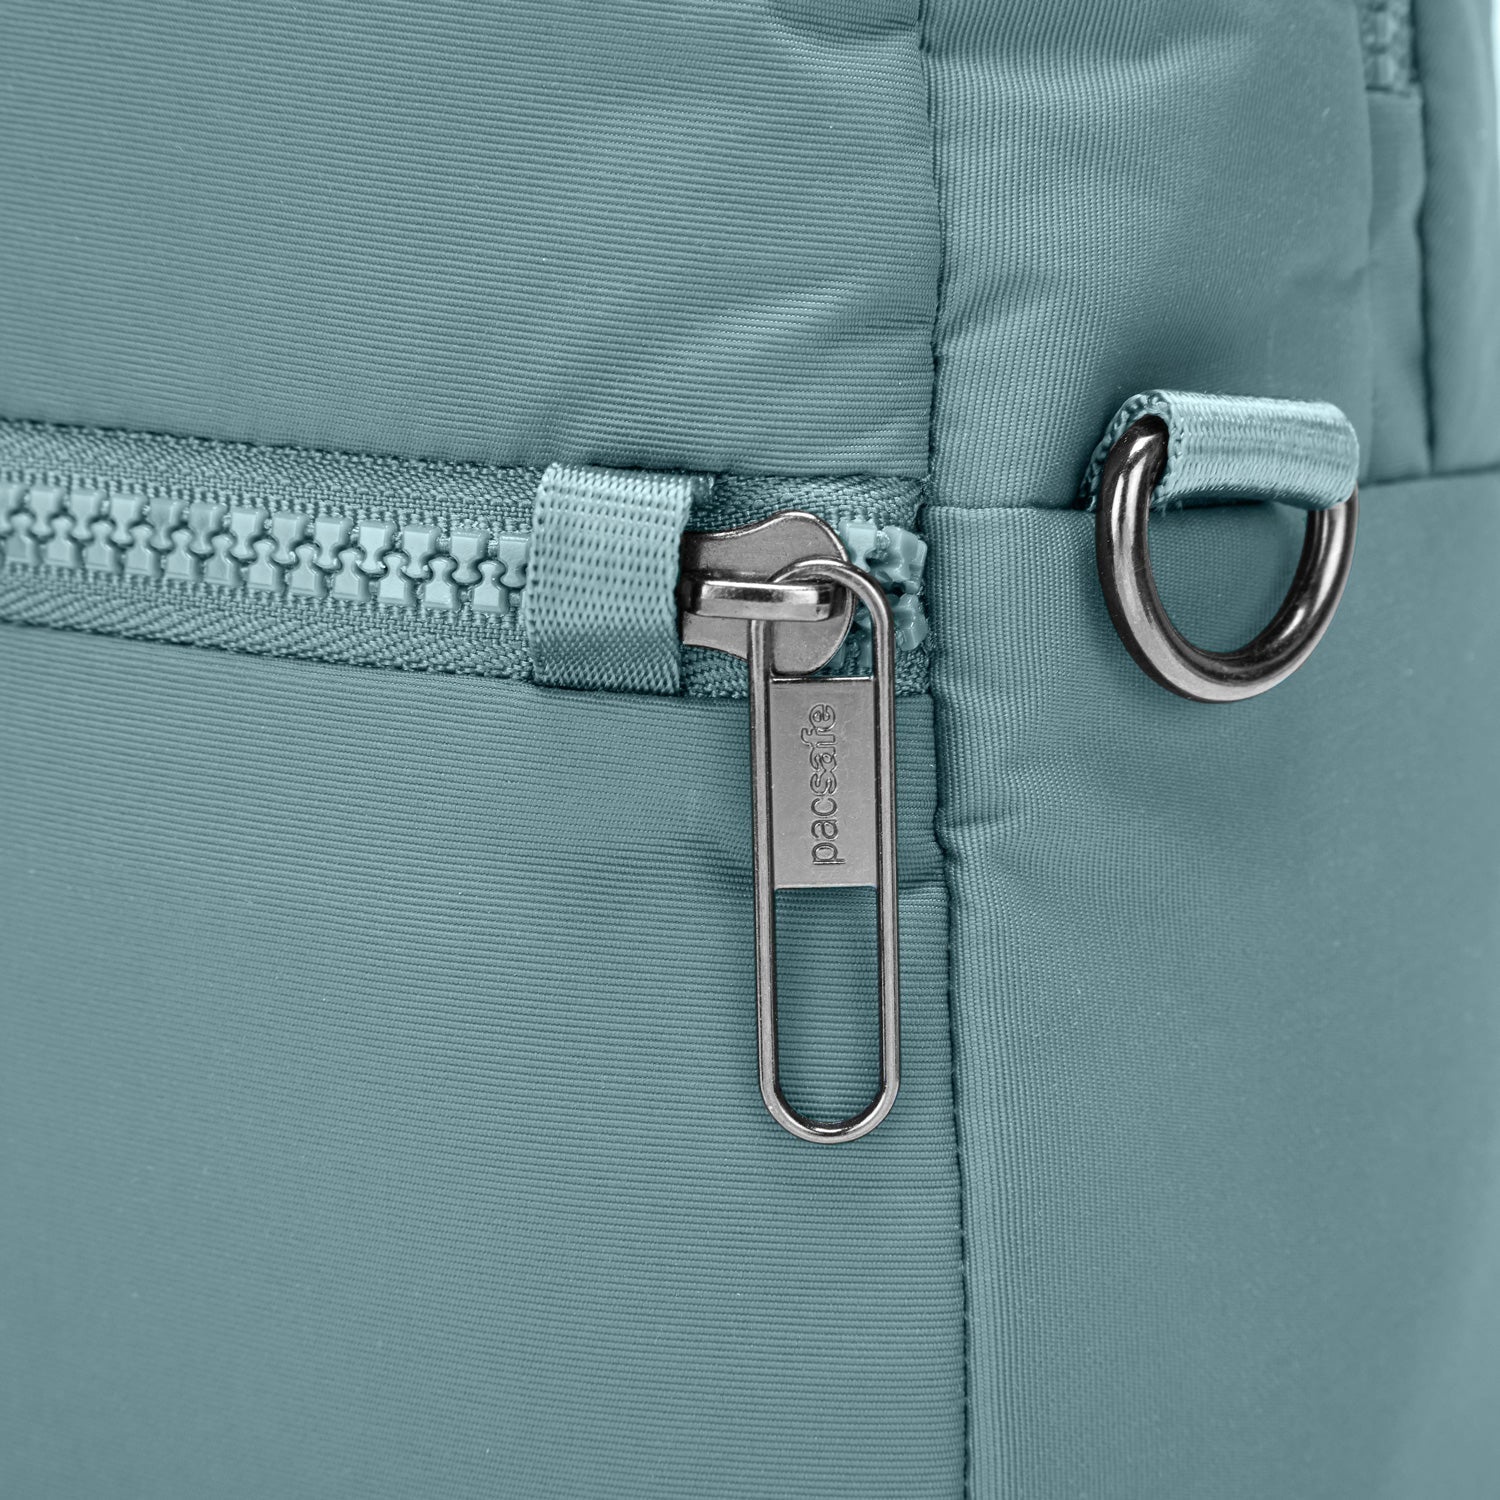 Keep Your Belongings Secure with Stylish Zipper Locks - Set of 4